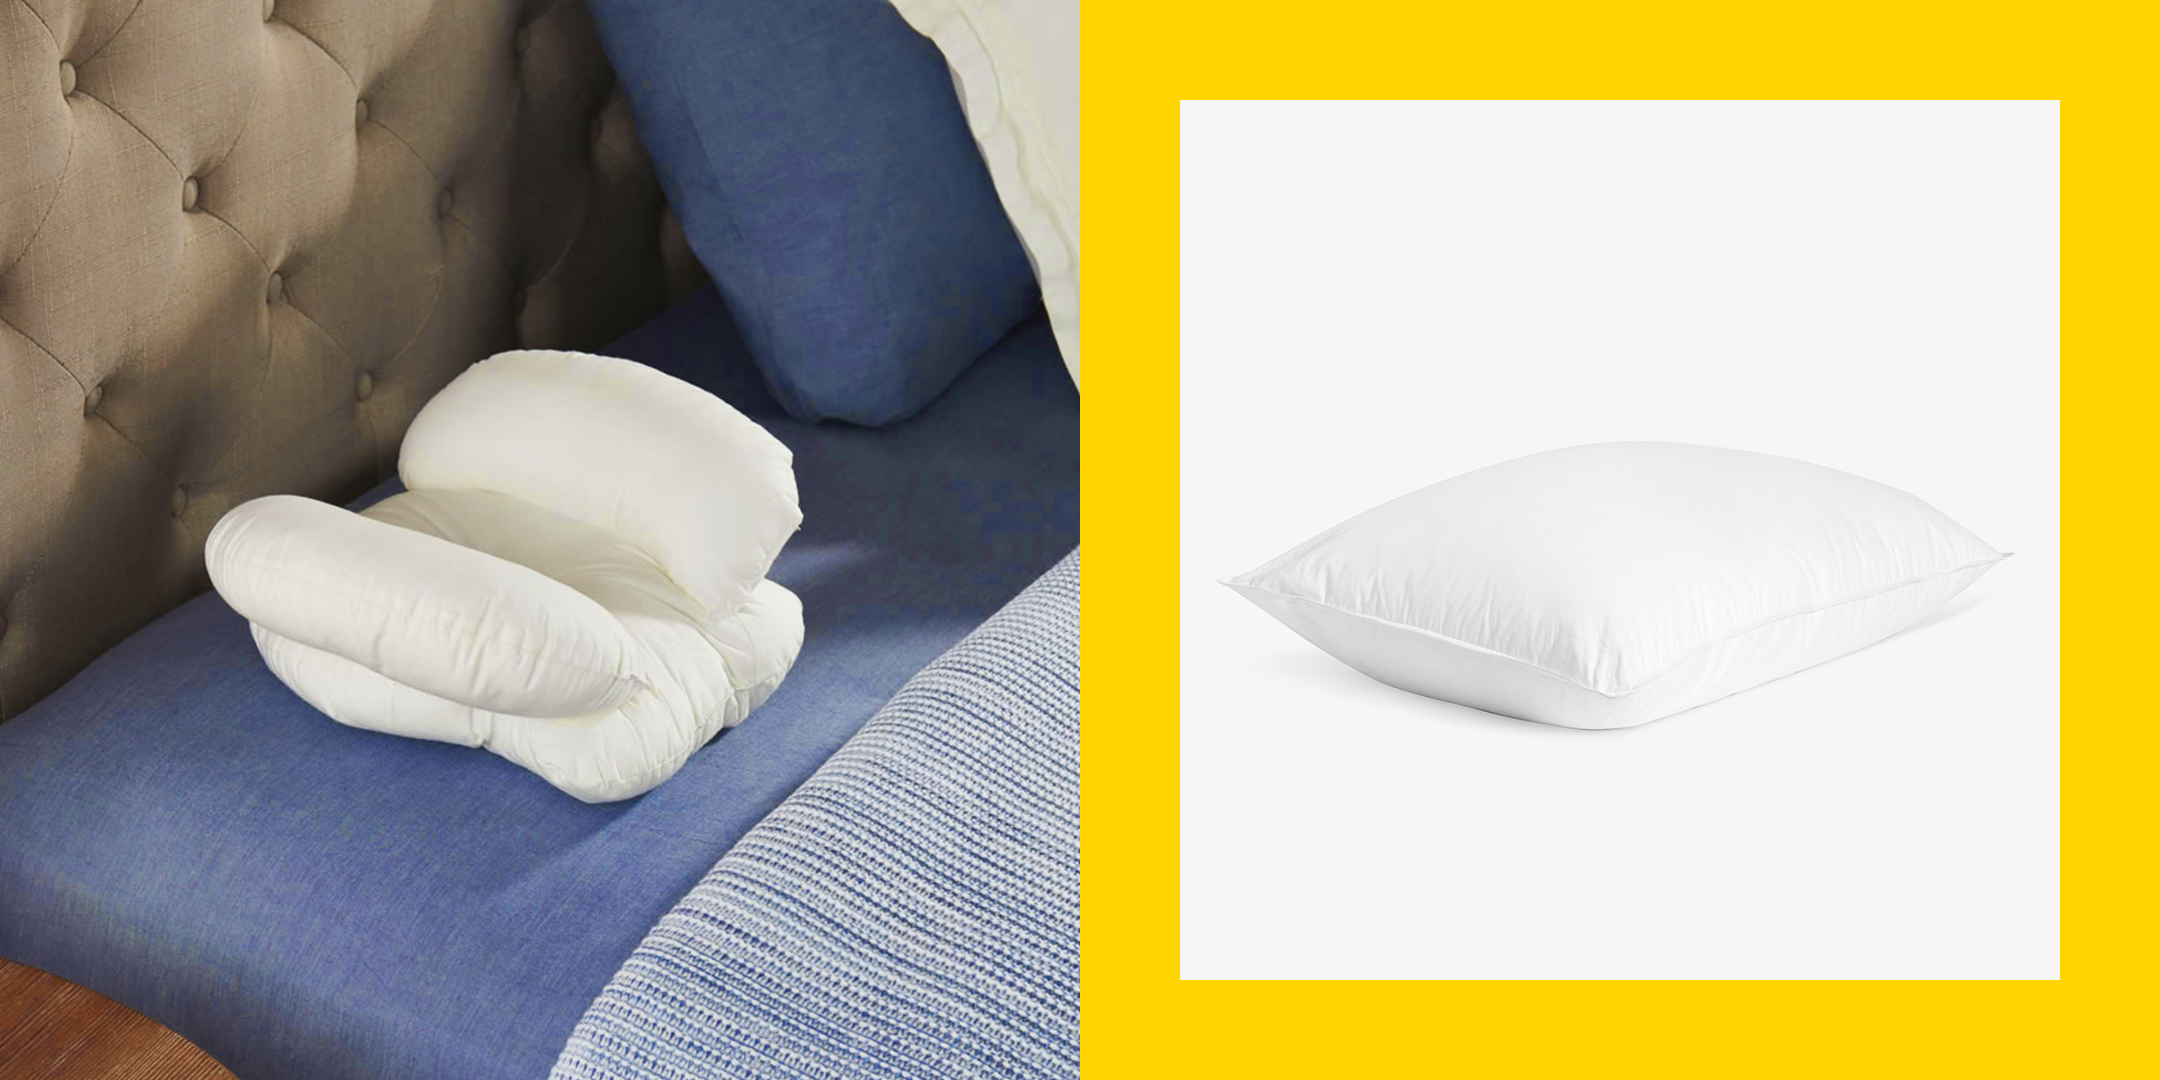 8 Best Pillows for Stomach Sleepers 2022